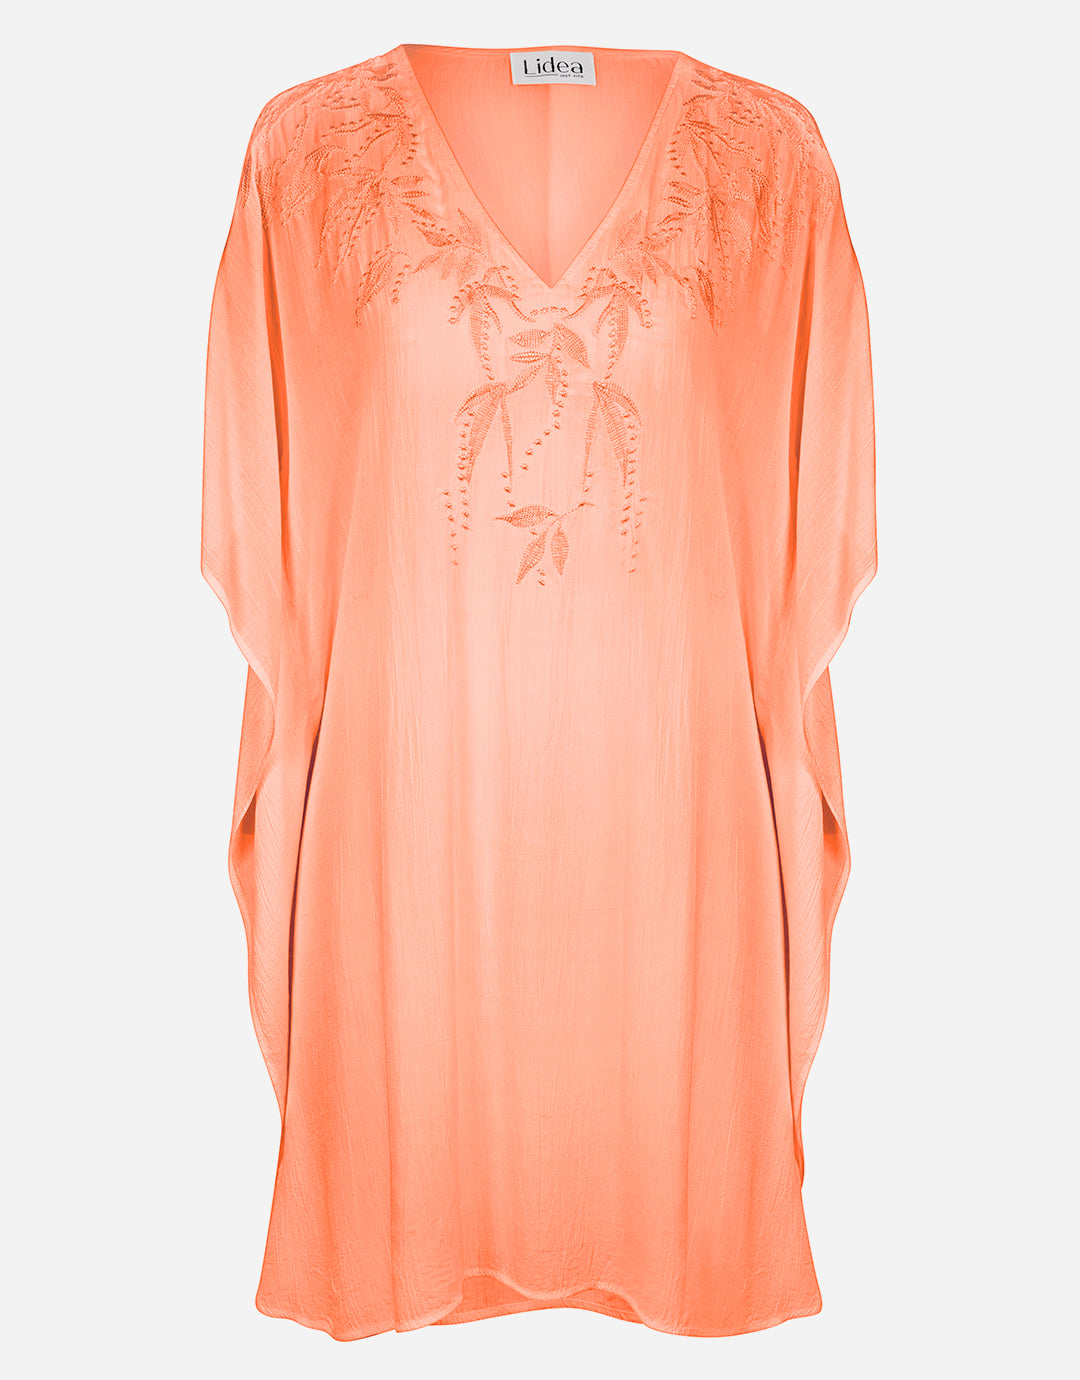 Embroidered Kaftan - Coral - Simply Beach UK